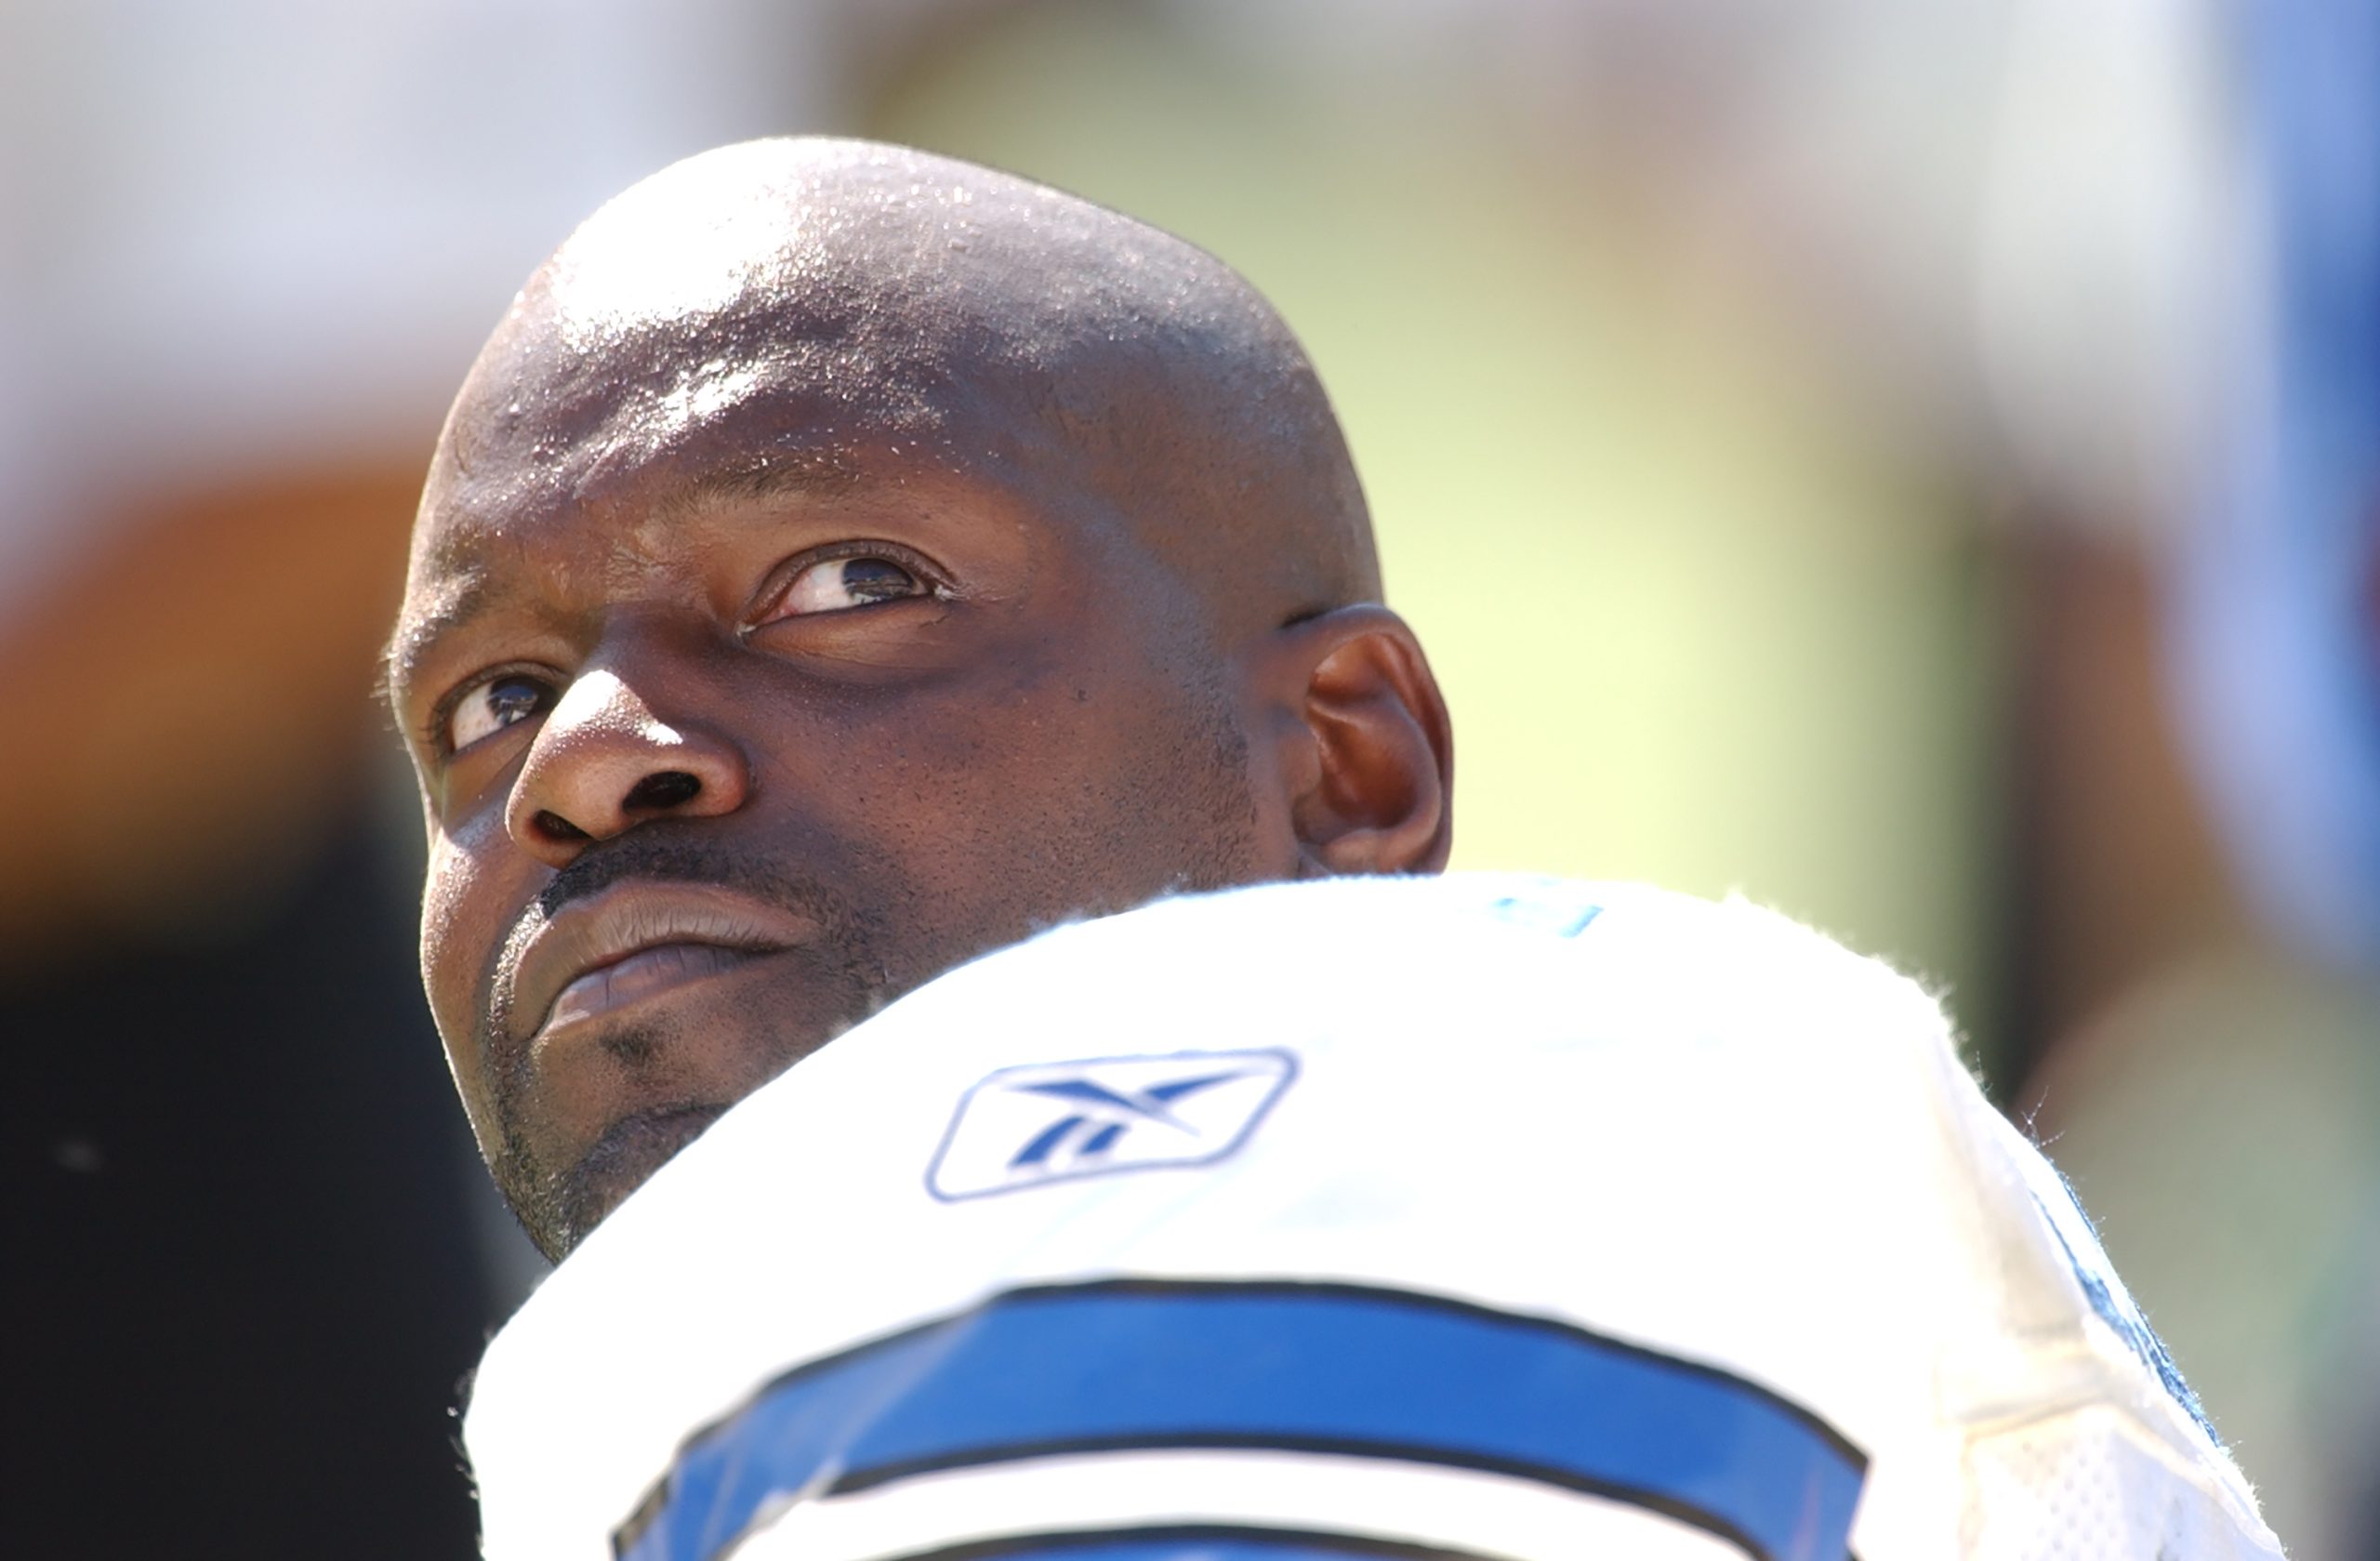 Exclusive: Emmitt Smith Addresses Being ‘Pushed Out’ by the Dallas Cowboys, Not Getting the Chance to Play for Bill Parcells